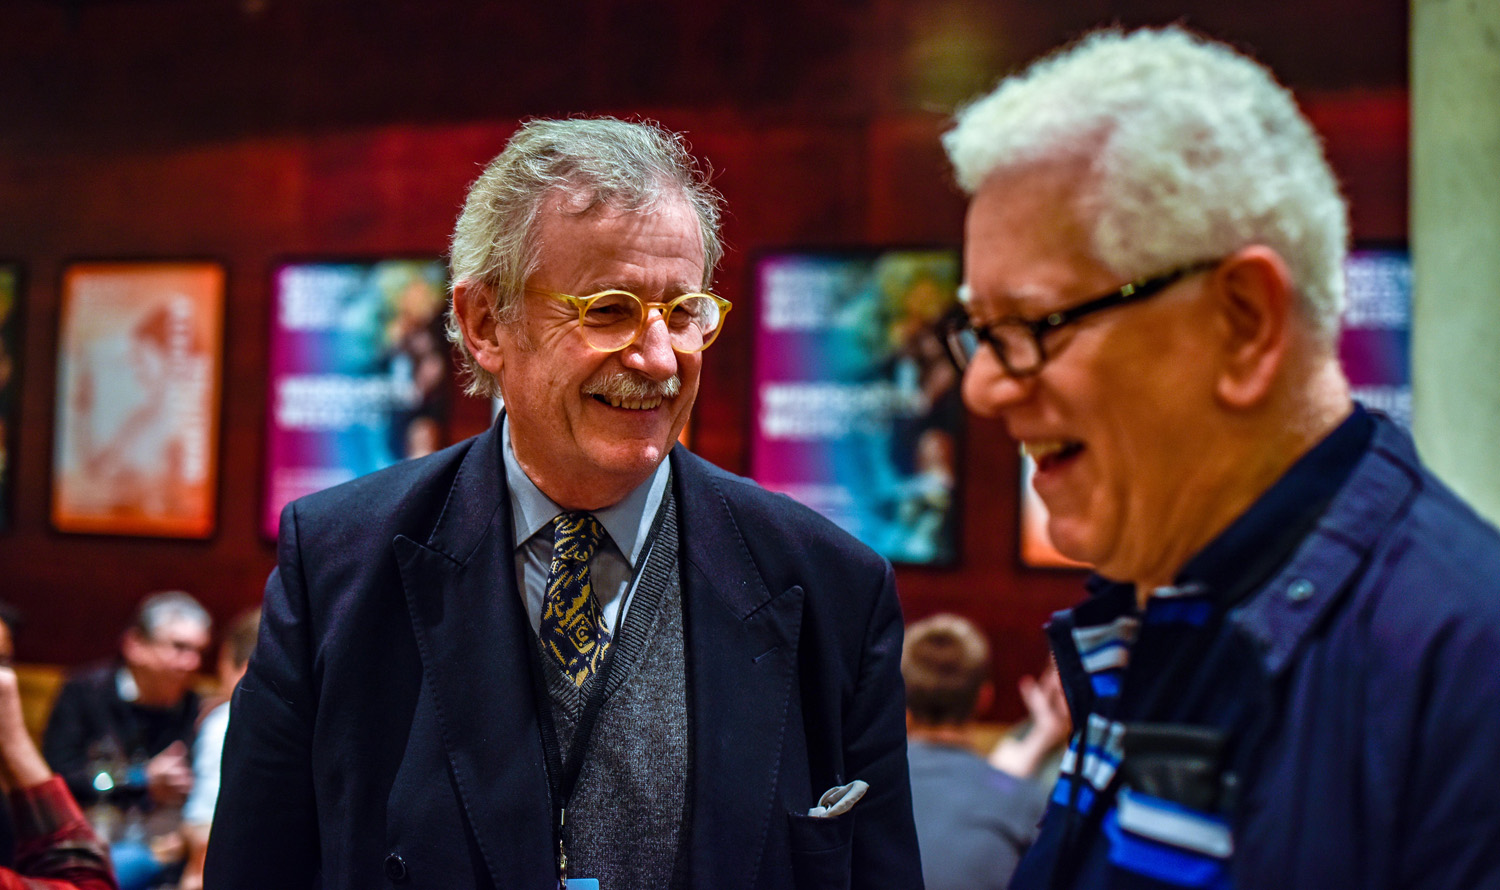 Professor Sir Christopher Frayling at the Widescreen Weekend 2018 opening night reception